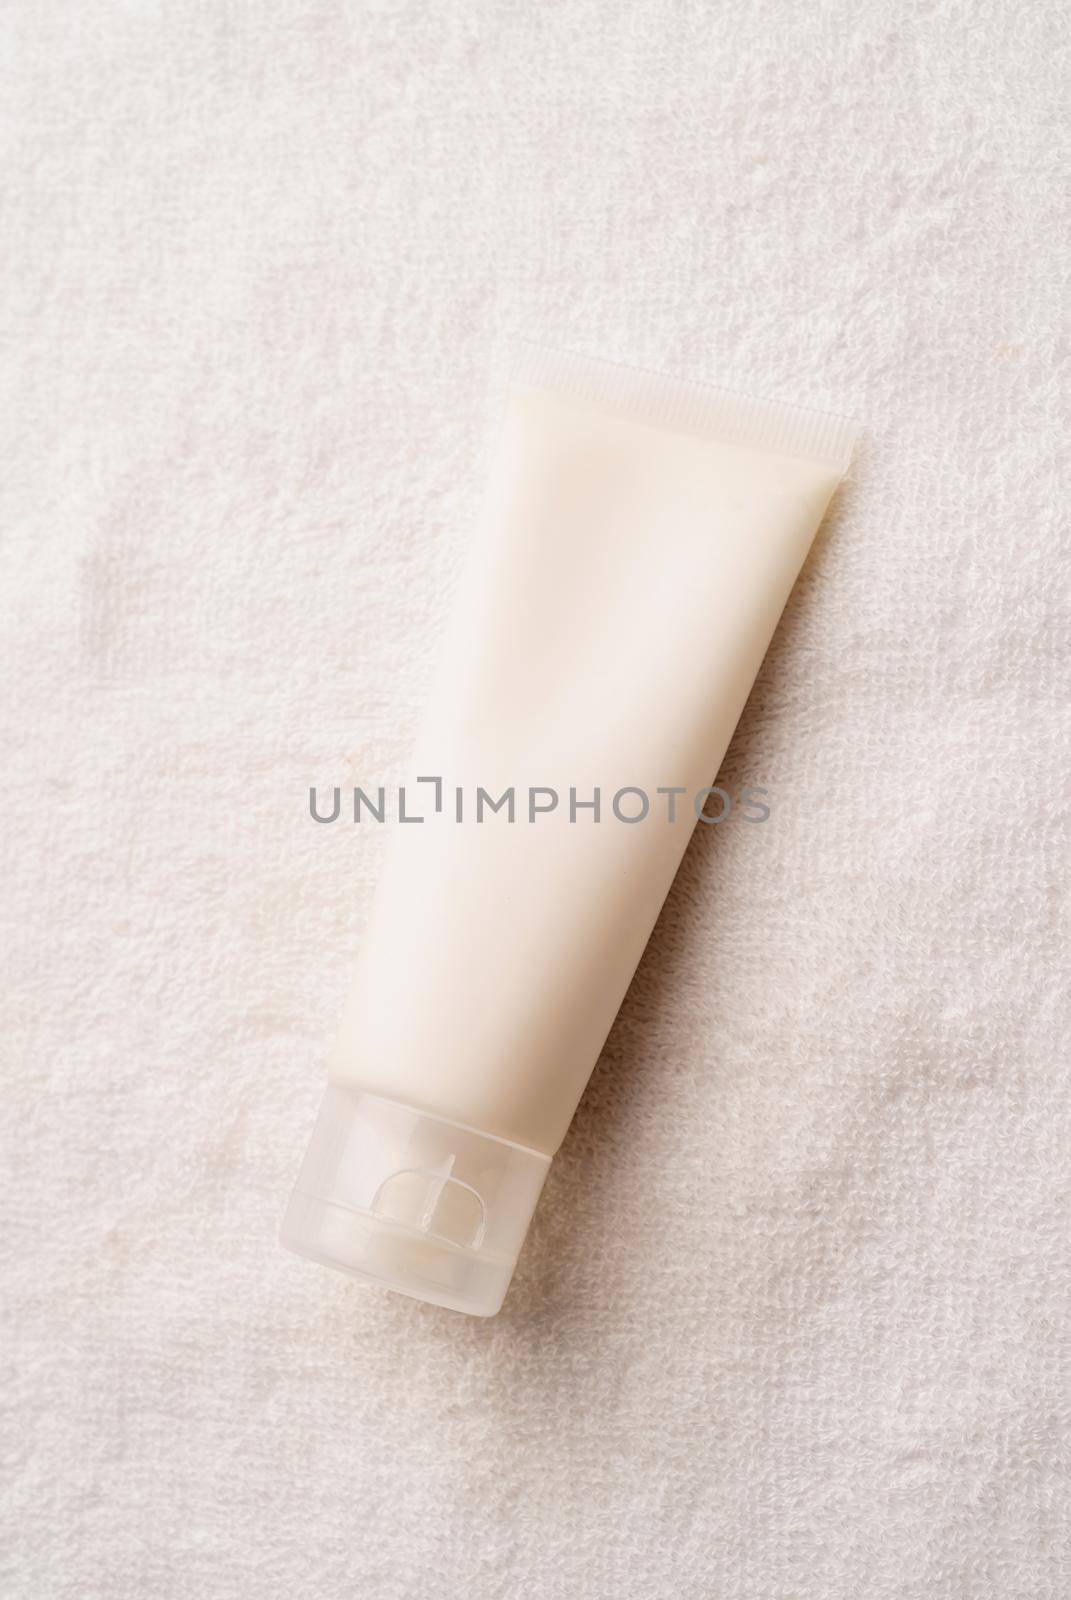 Mockup facial skincare product white tube with blank label on farbic background, Top view